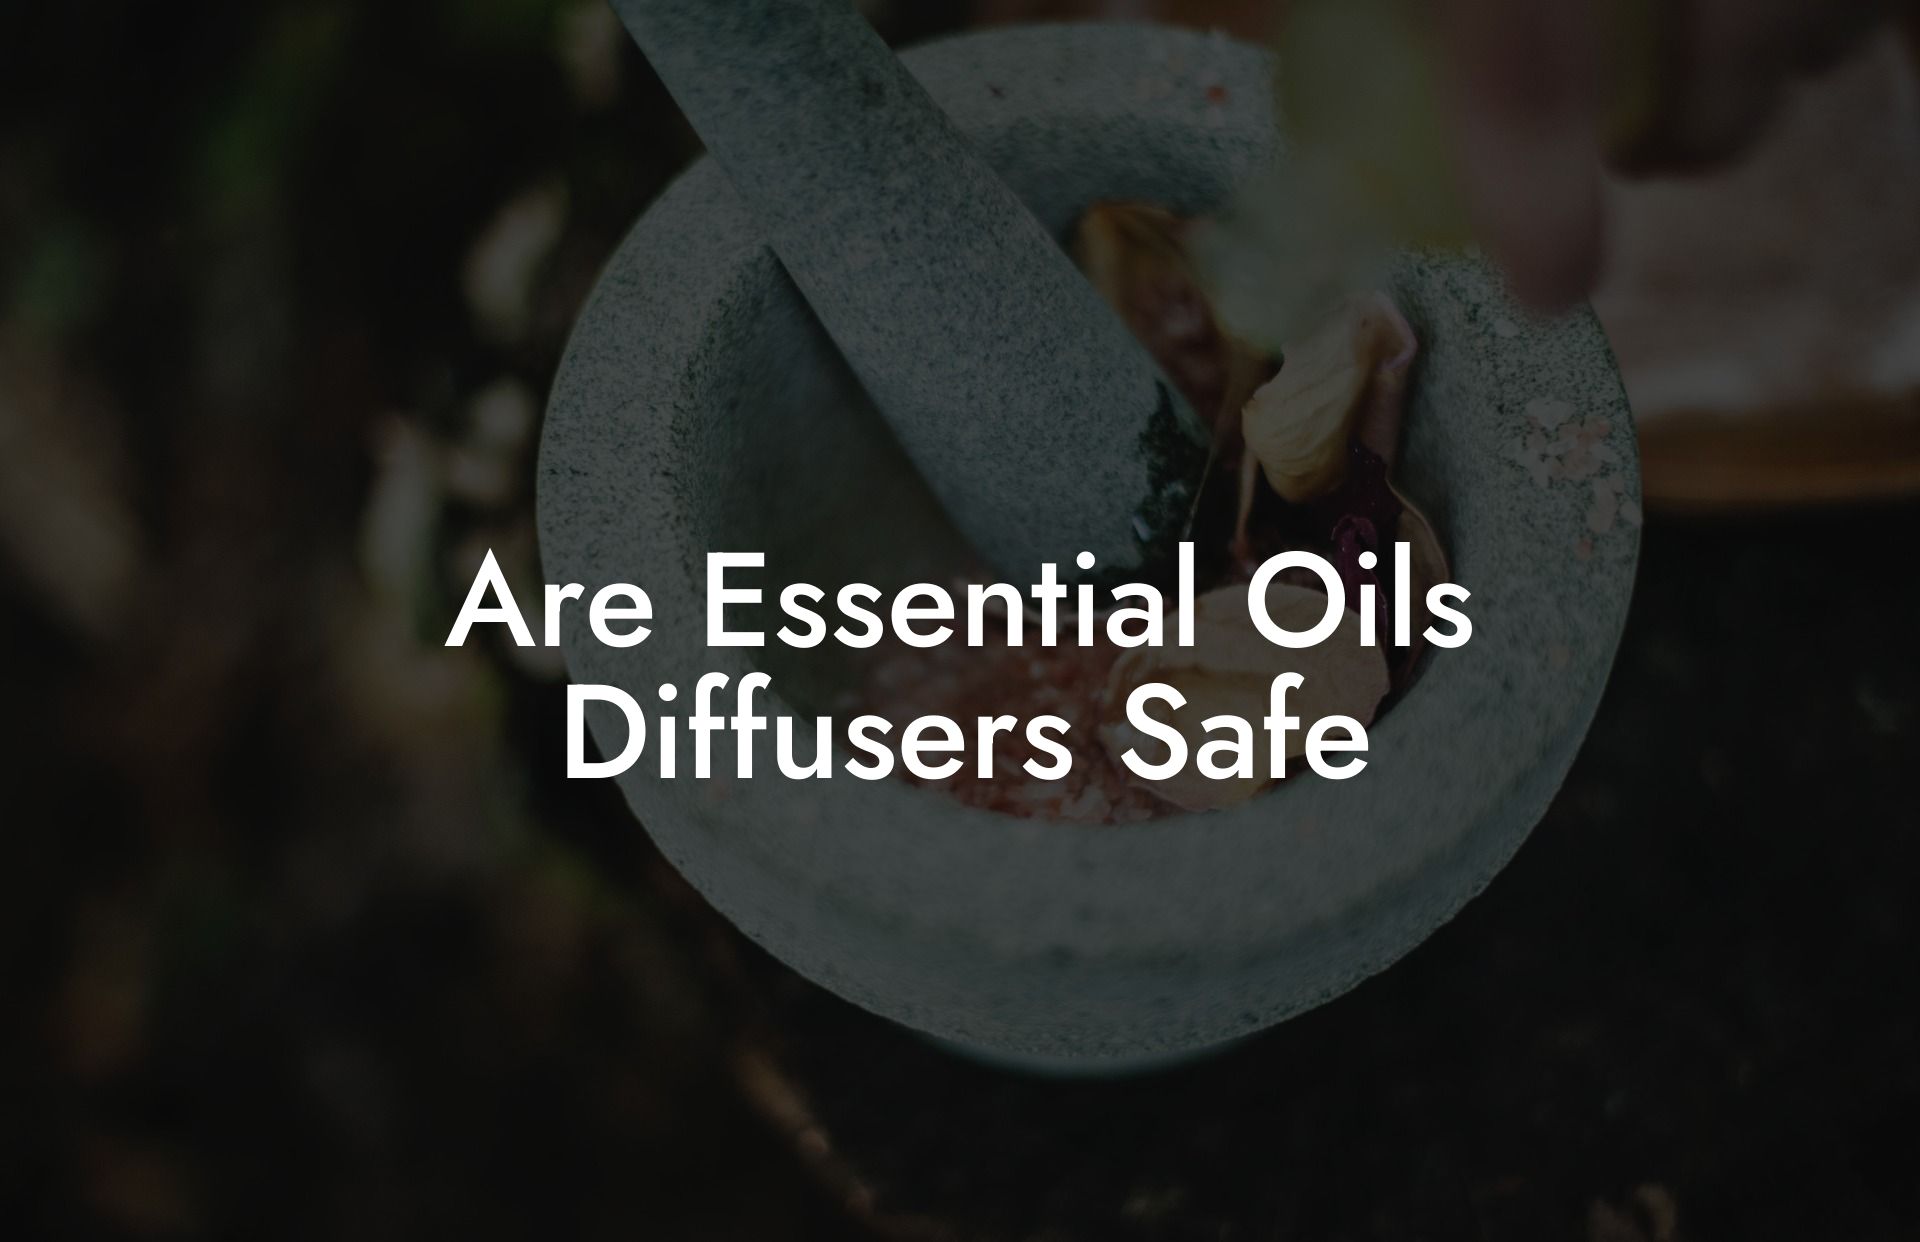 Are Essential Oils Diffusers Safe